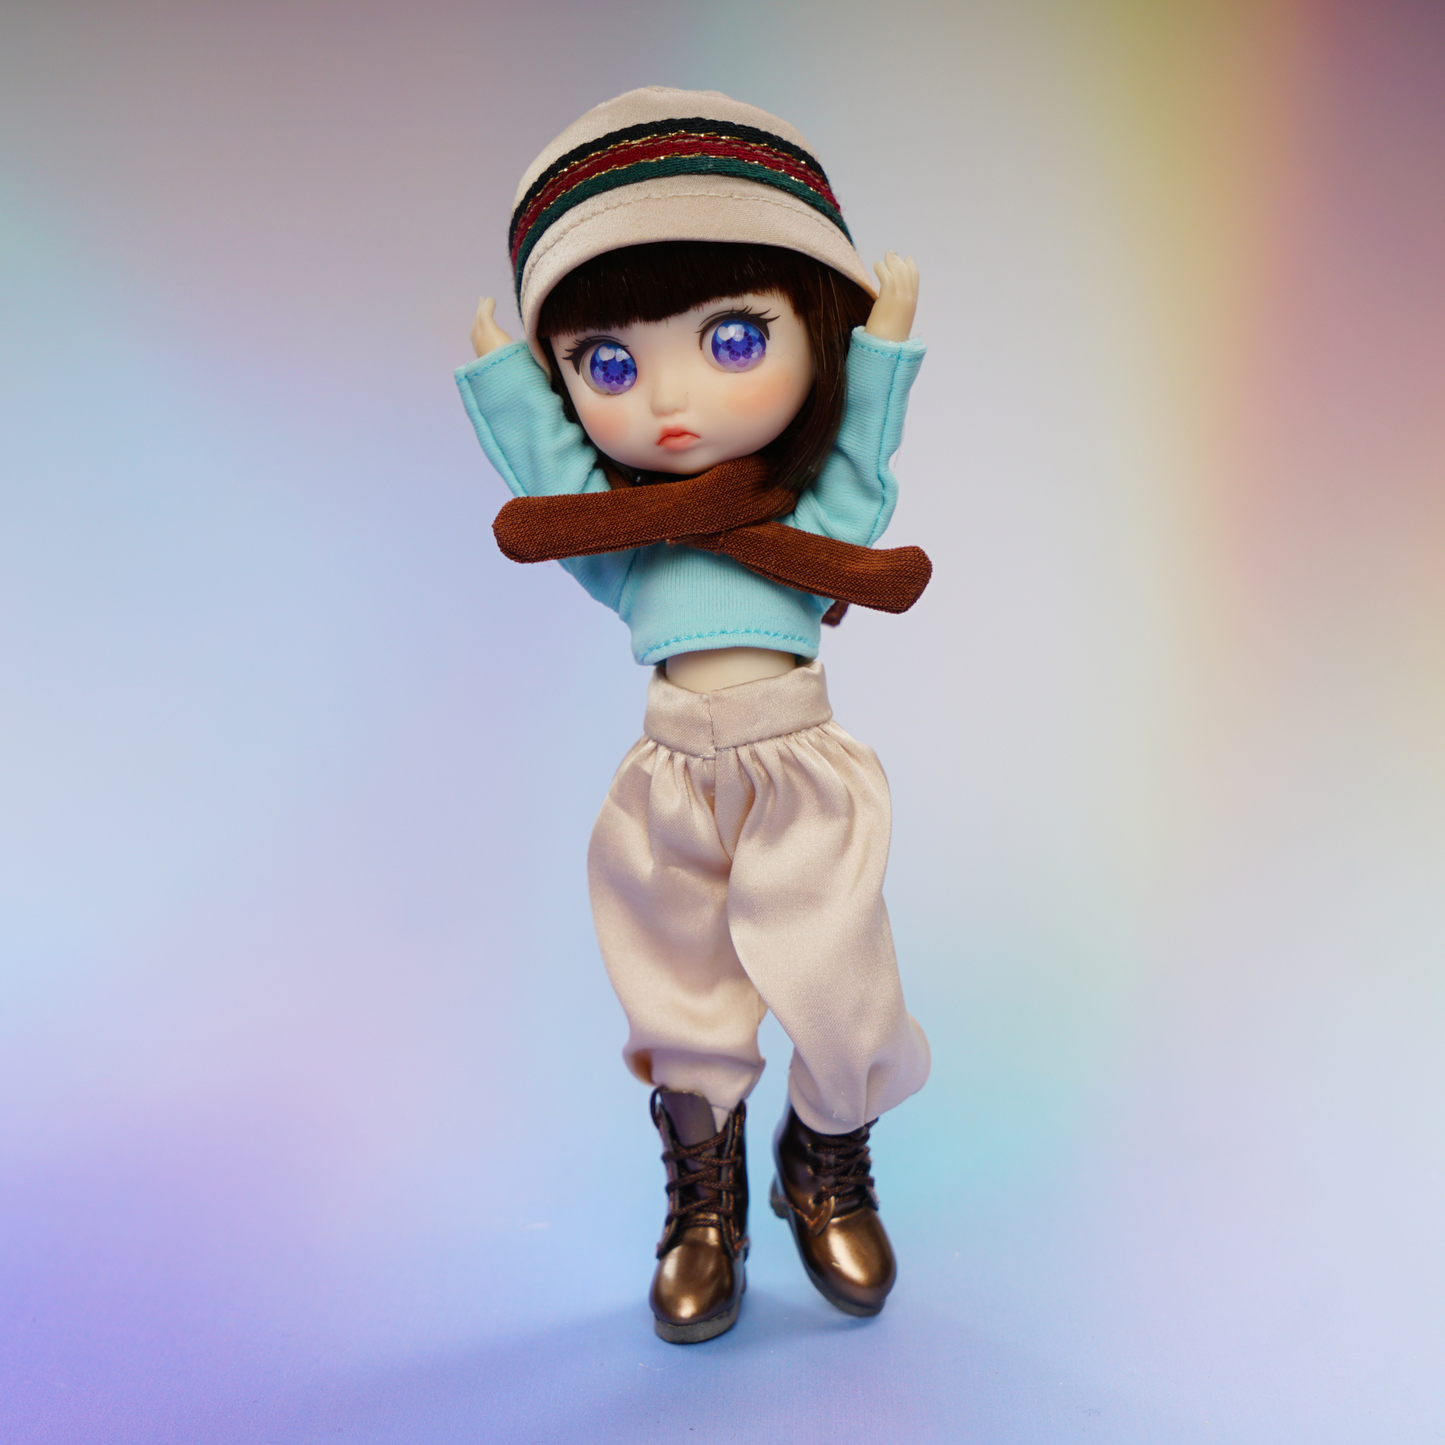 Lady Doolli Dress Up & Play Ball-Jointed Dolls